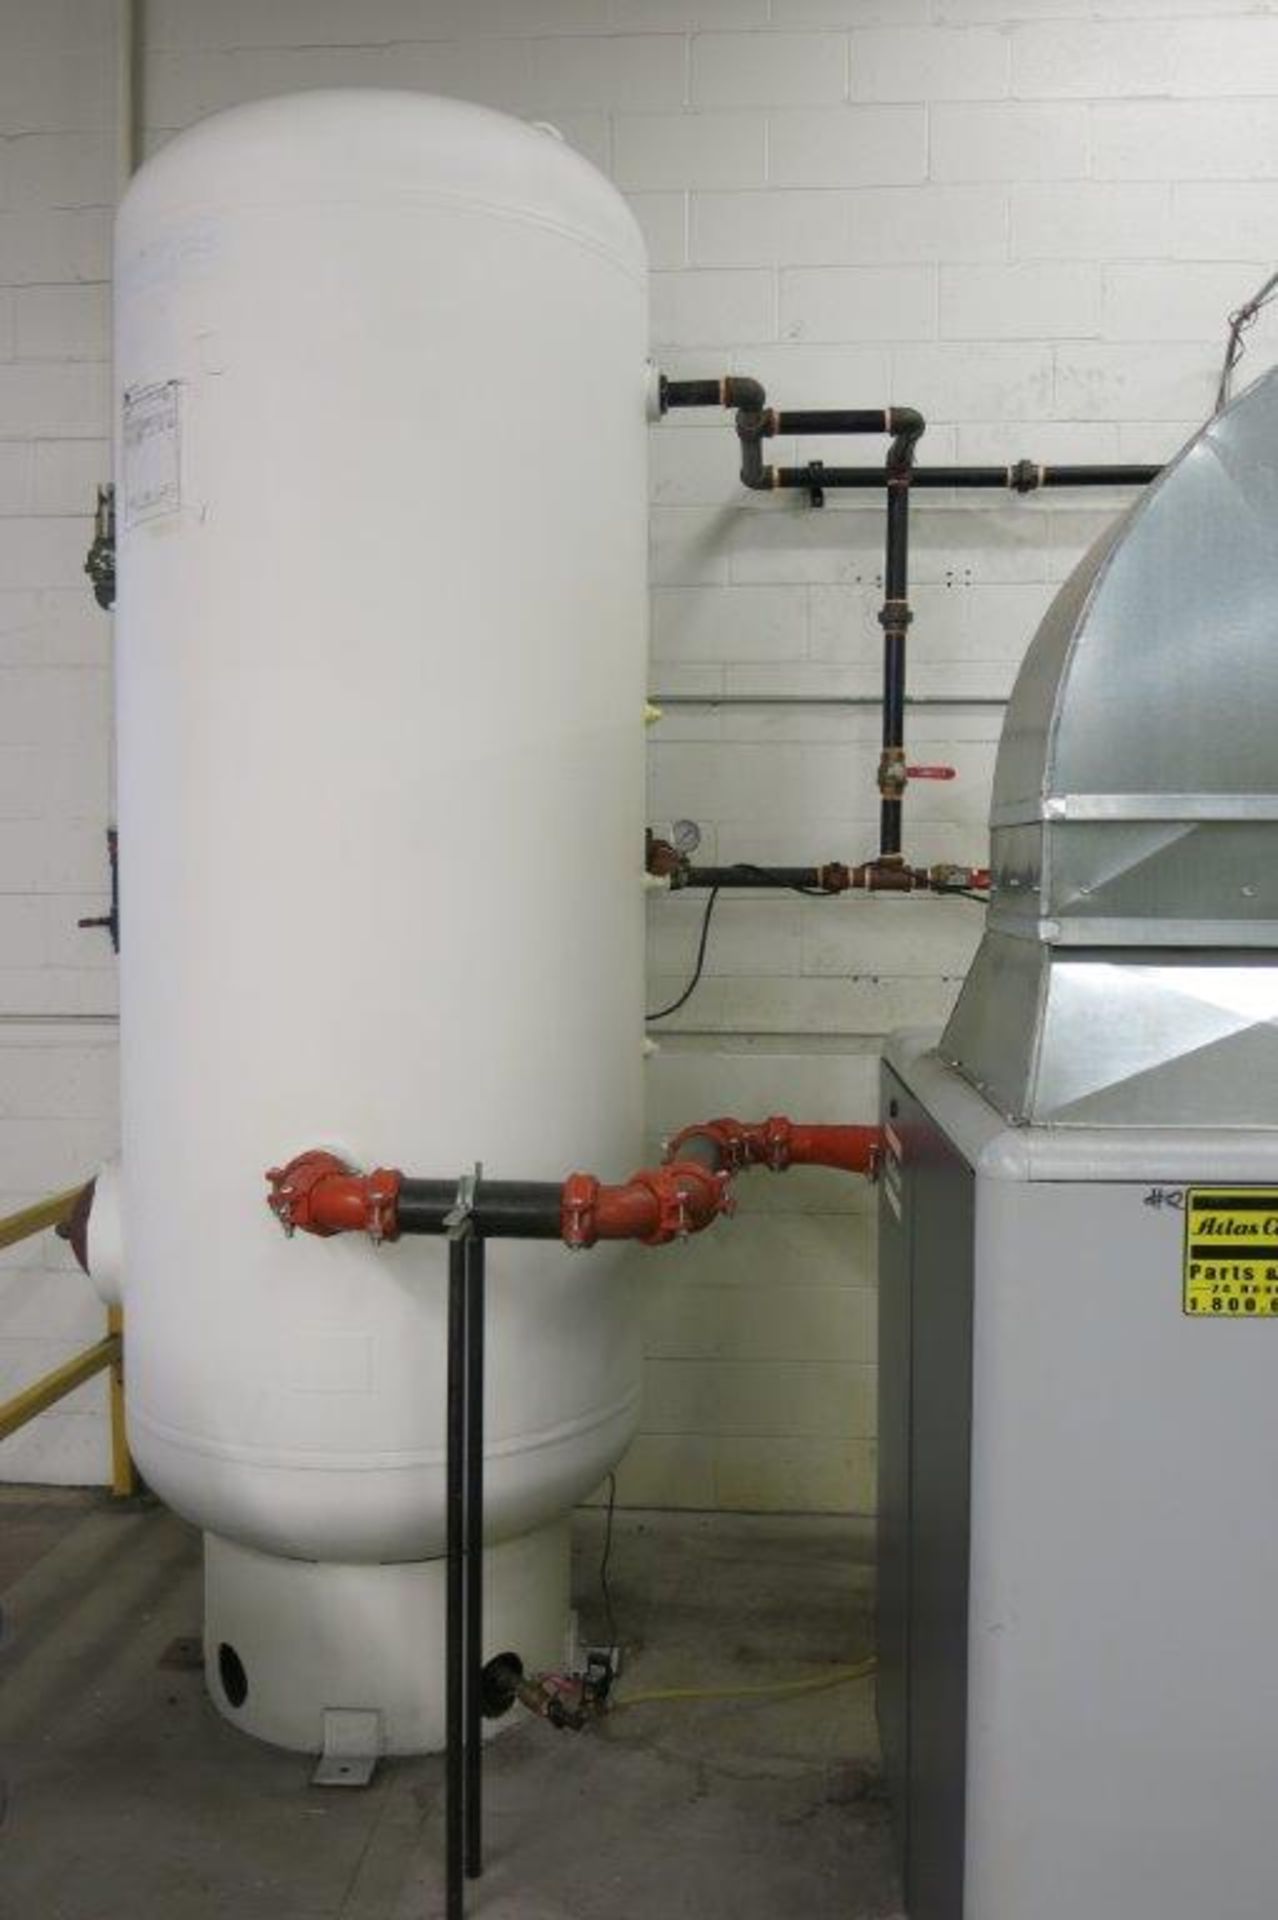 AIR COMPRESSOR RECEIVING TANK, (RIGGER REQUIRED)